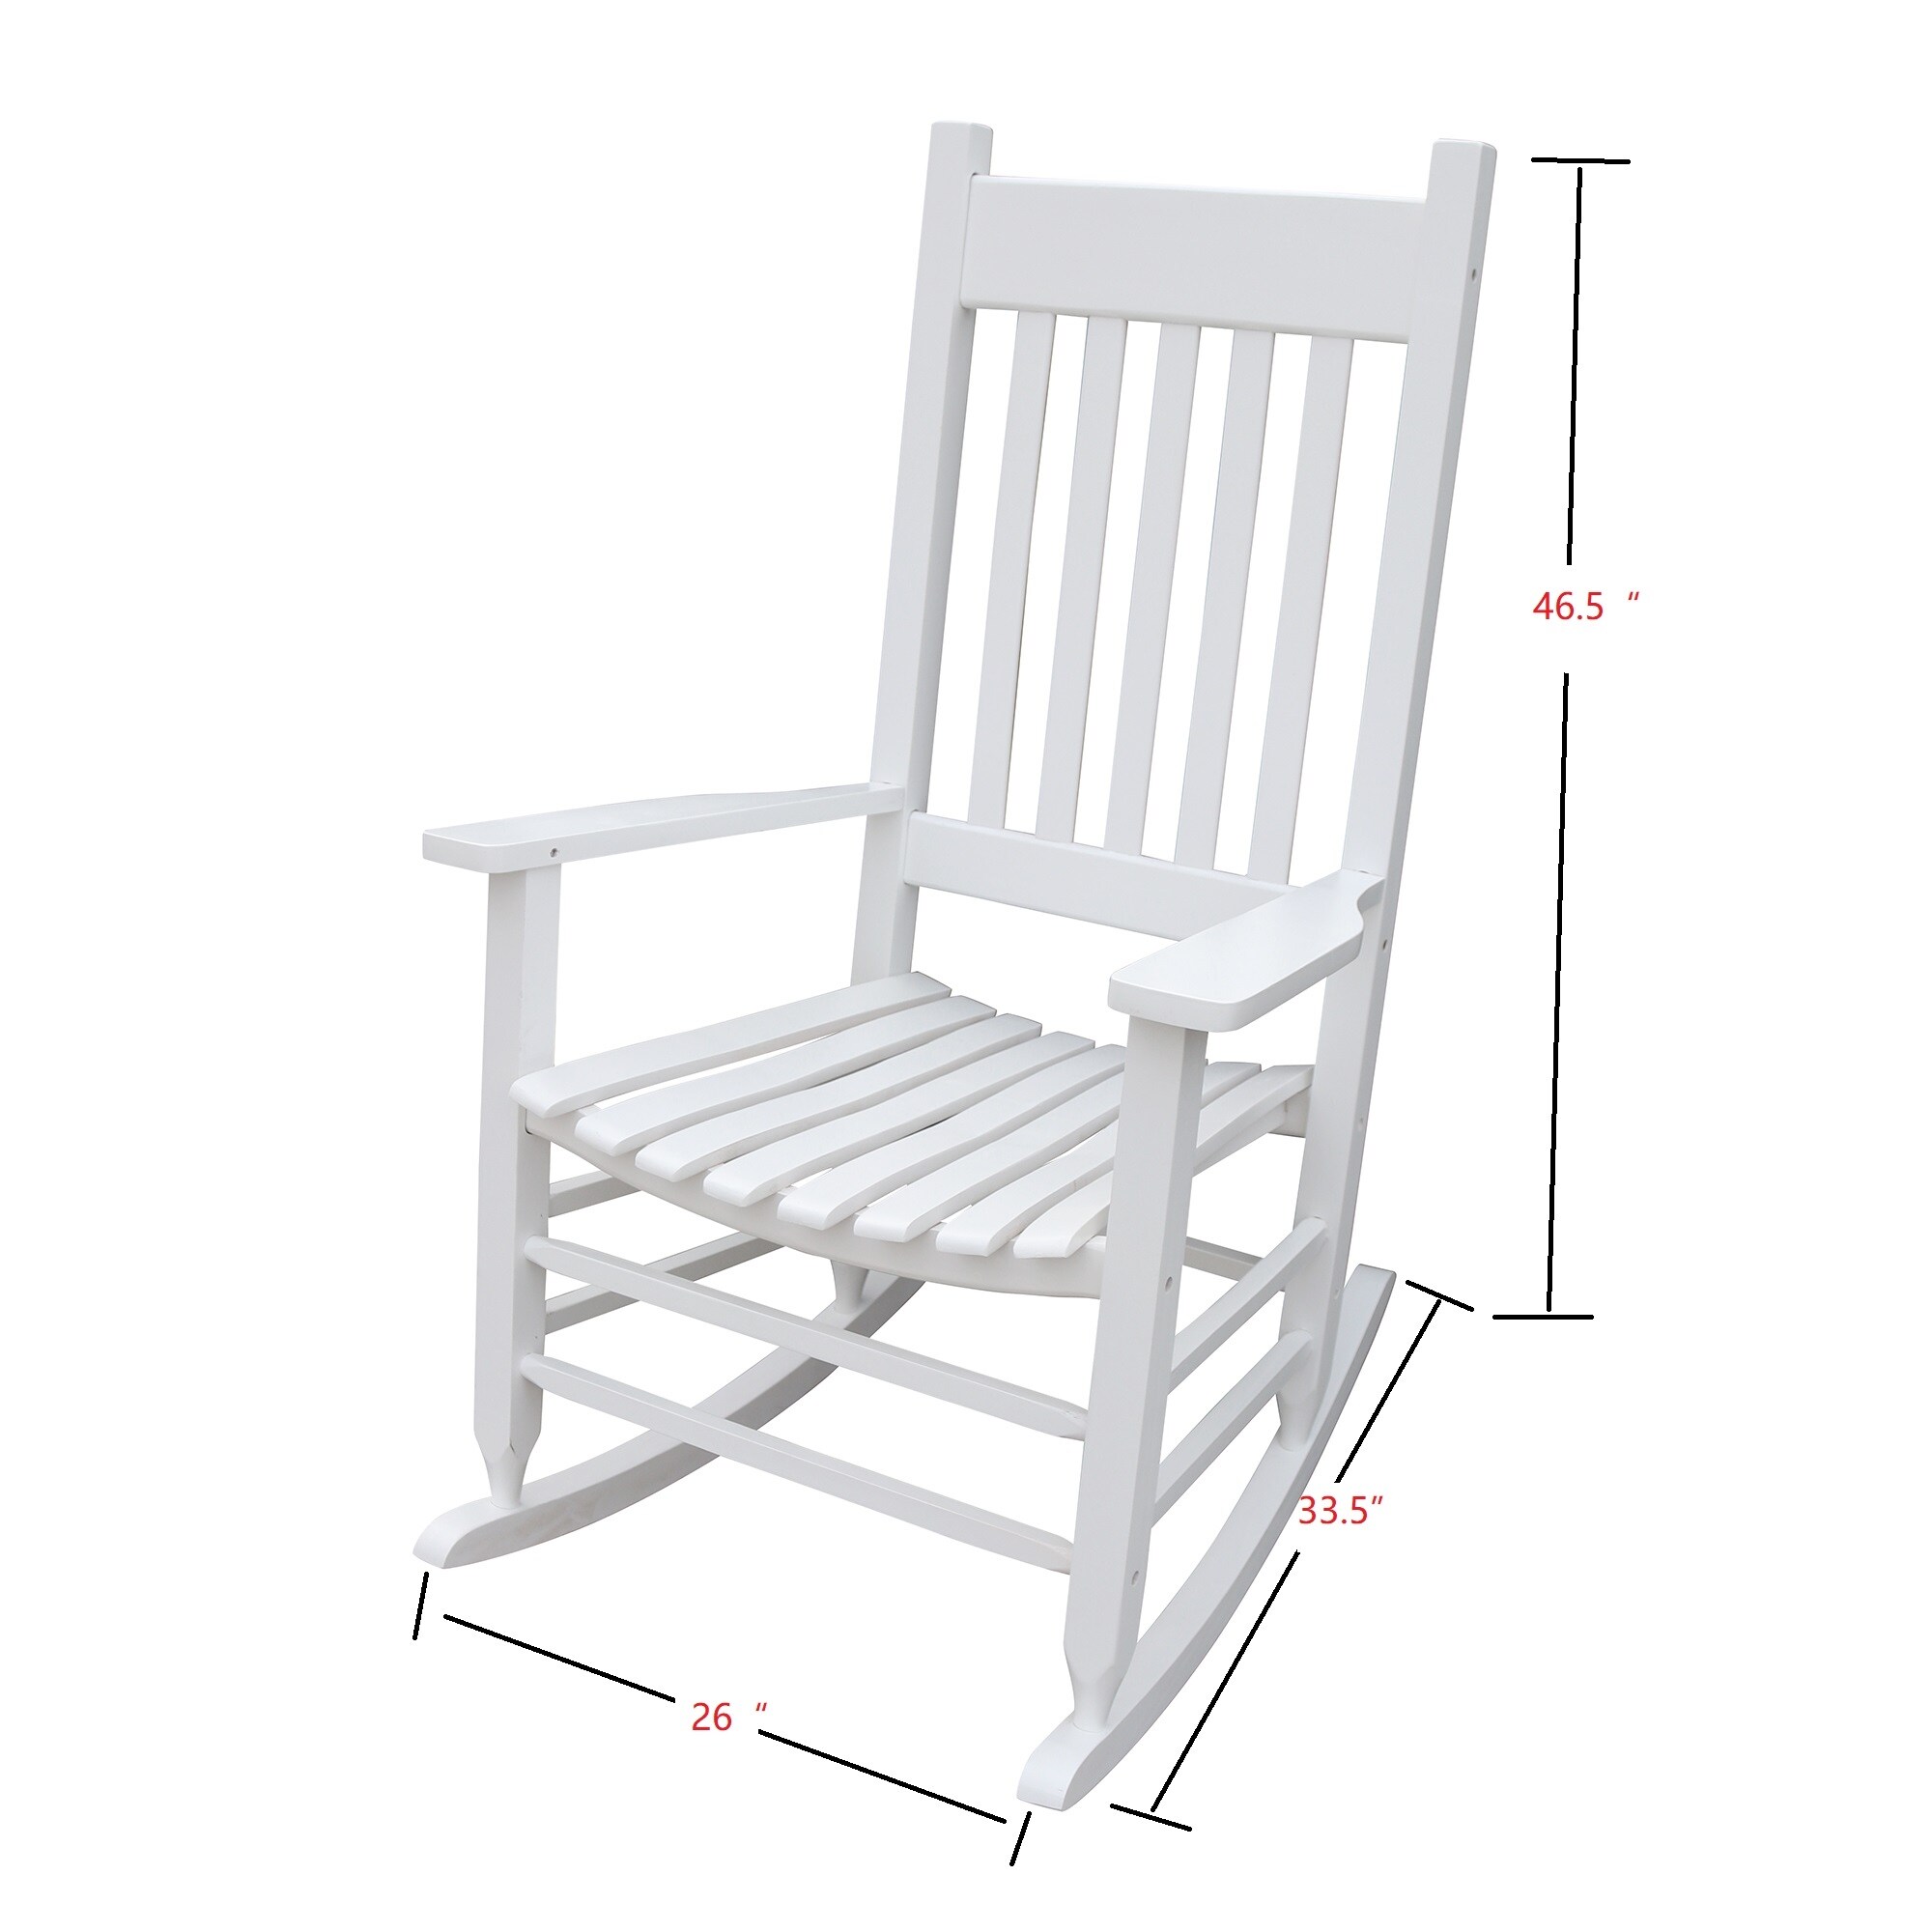 Leisure Porch Rocking Chair for Balcony, Porch,Constructed of Solid Hardwood,Sturdy Slatted Back Rest for Comfort and Safety